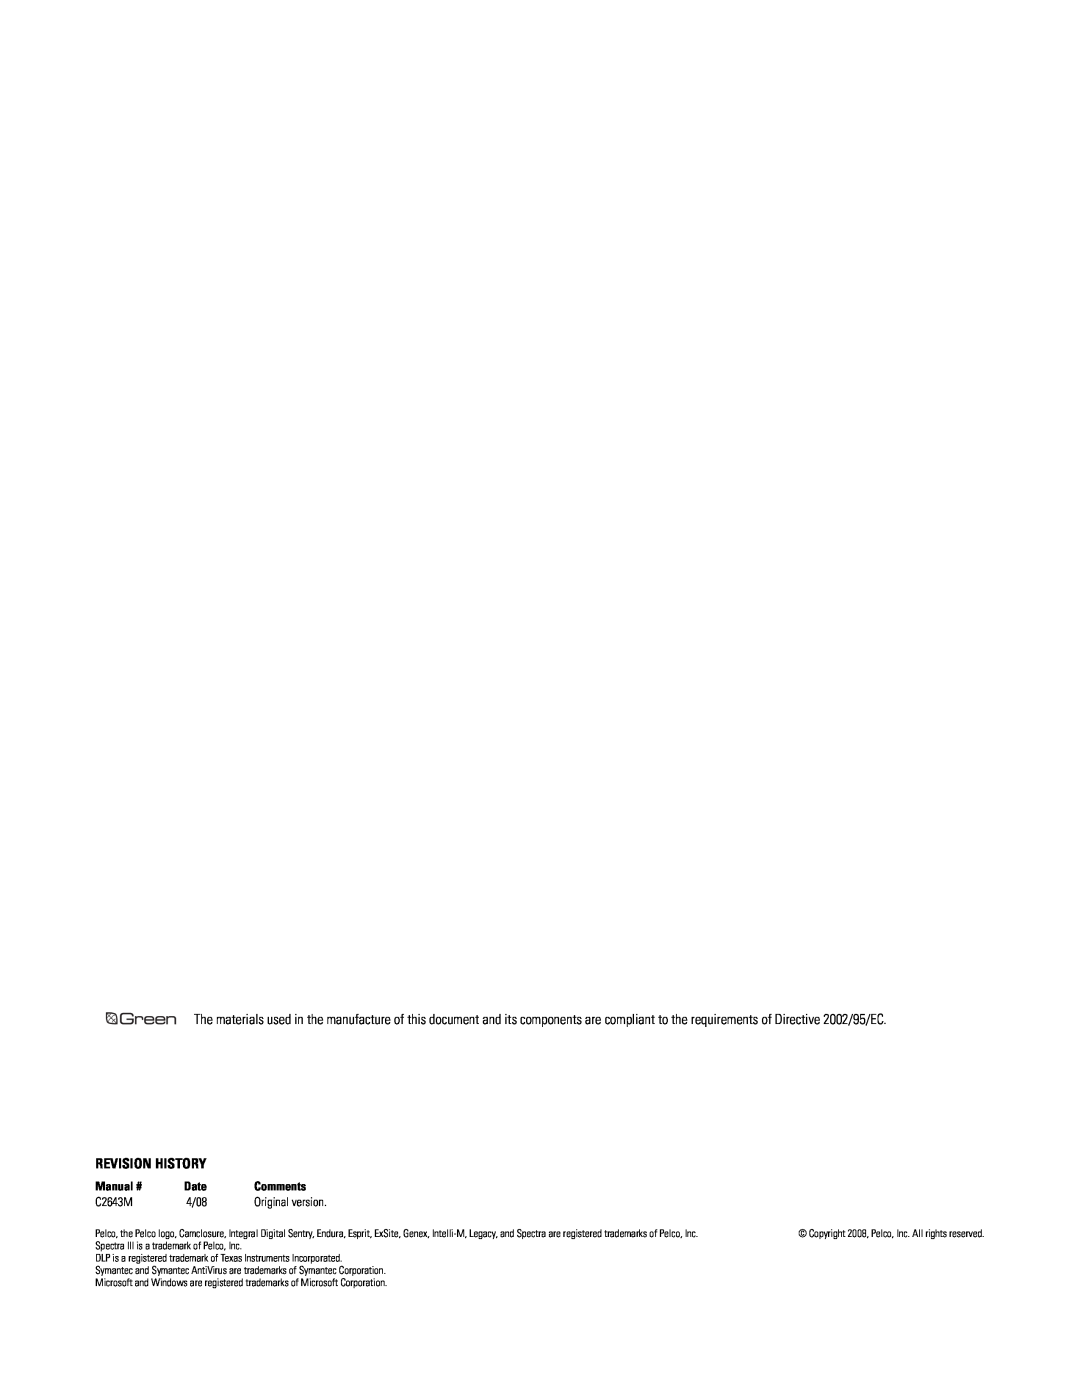 Pelco dx8100 installation instructions Revision History, Manual #, Date, Comments, C2643M, 4/08 